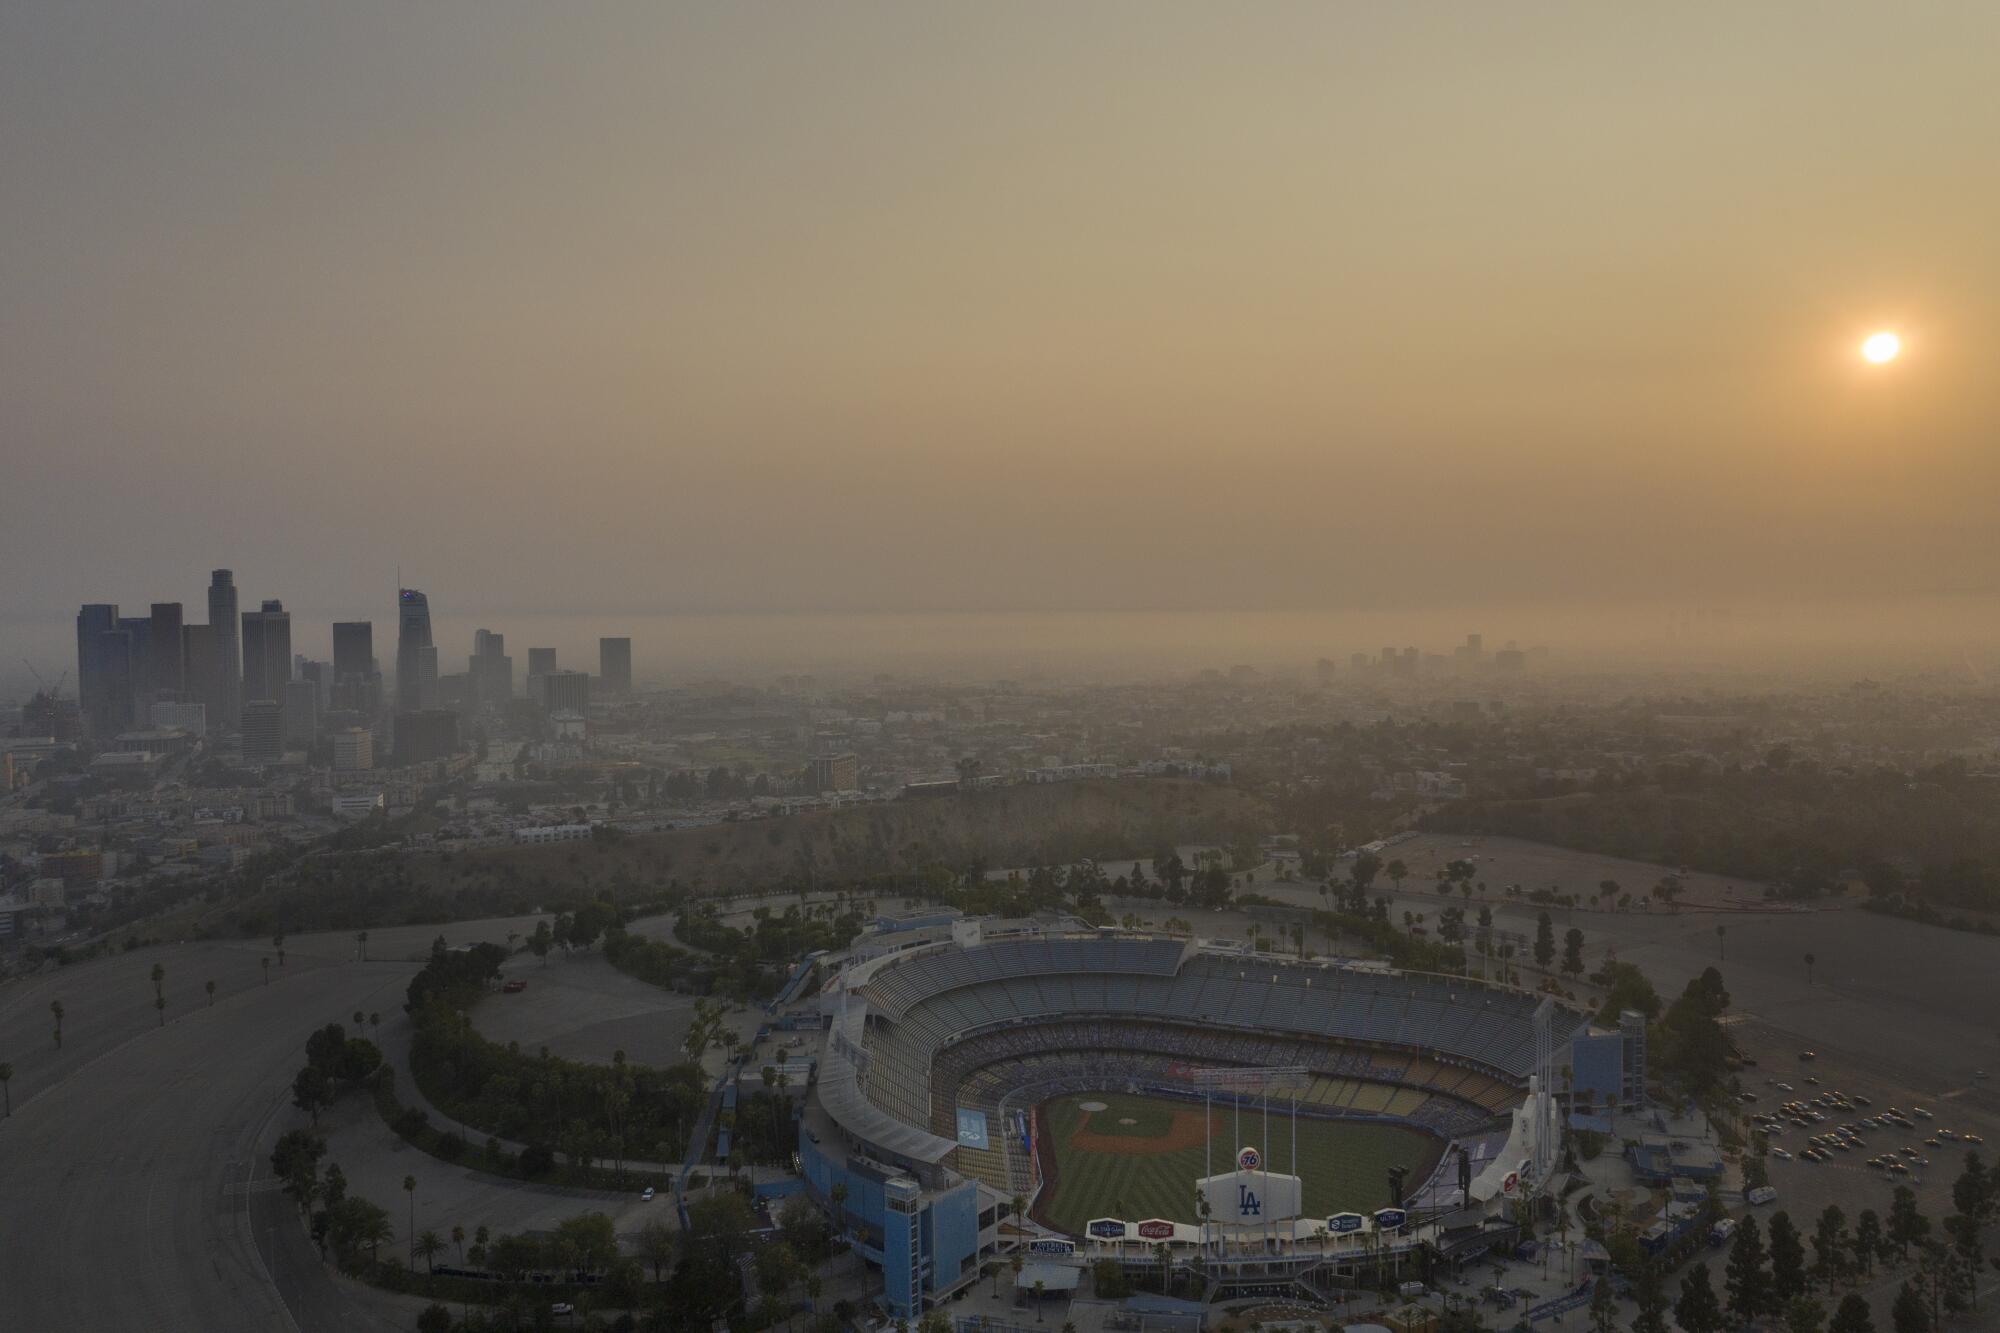 An aerial view of Dodger Stadium and the downtown Los Angeles obscured by smoke, ash and smog.